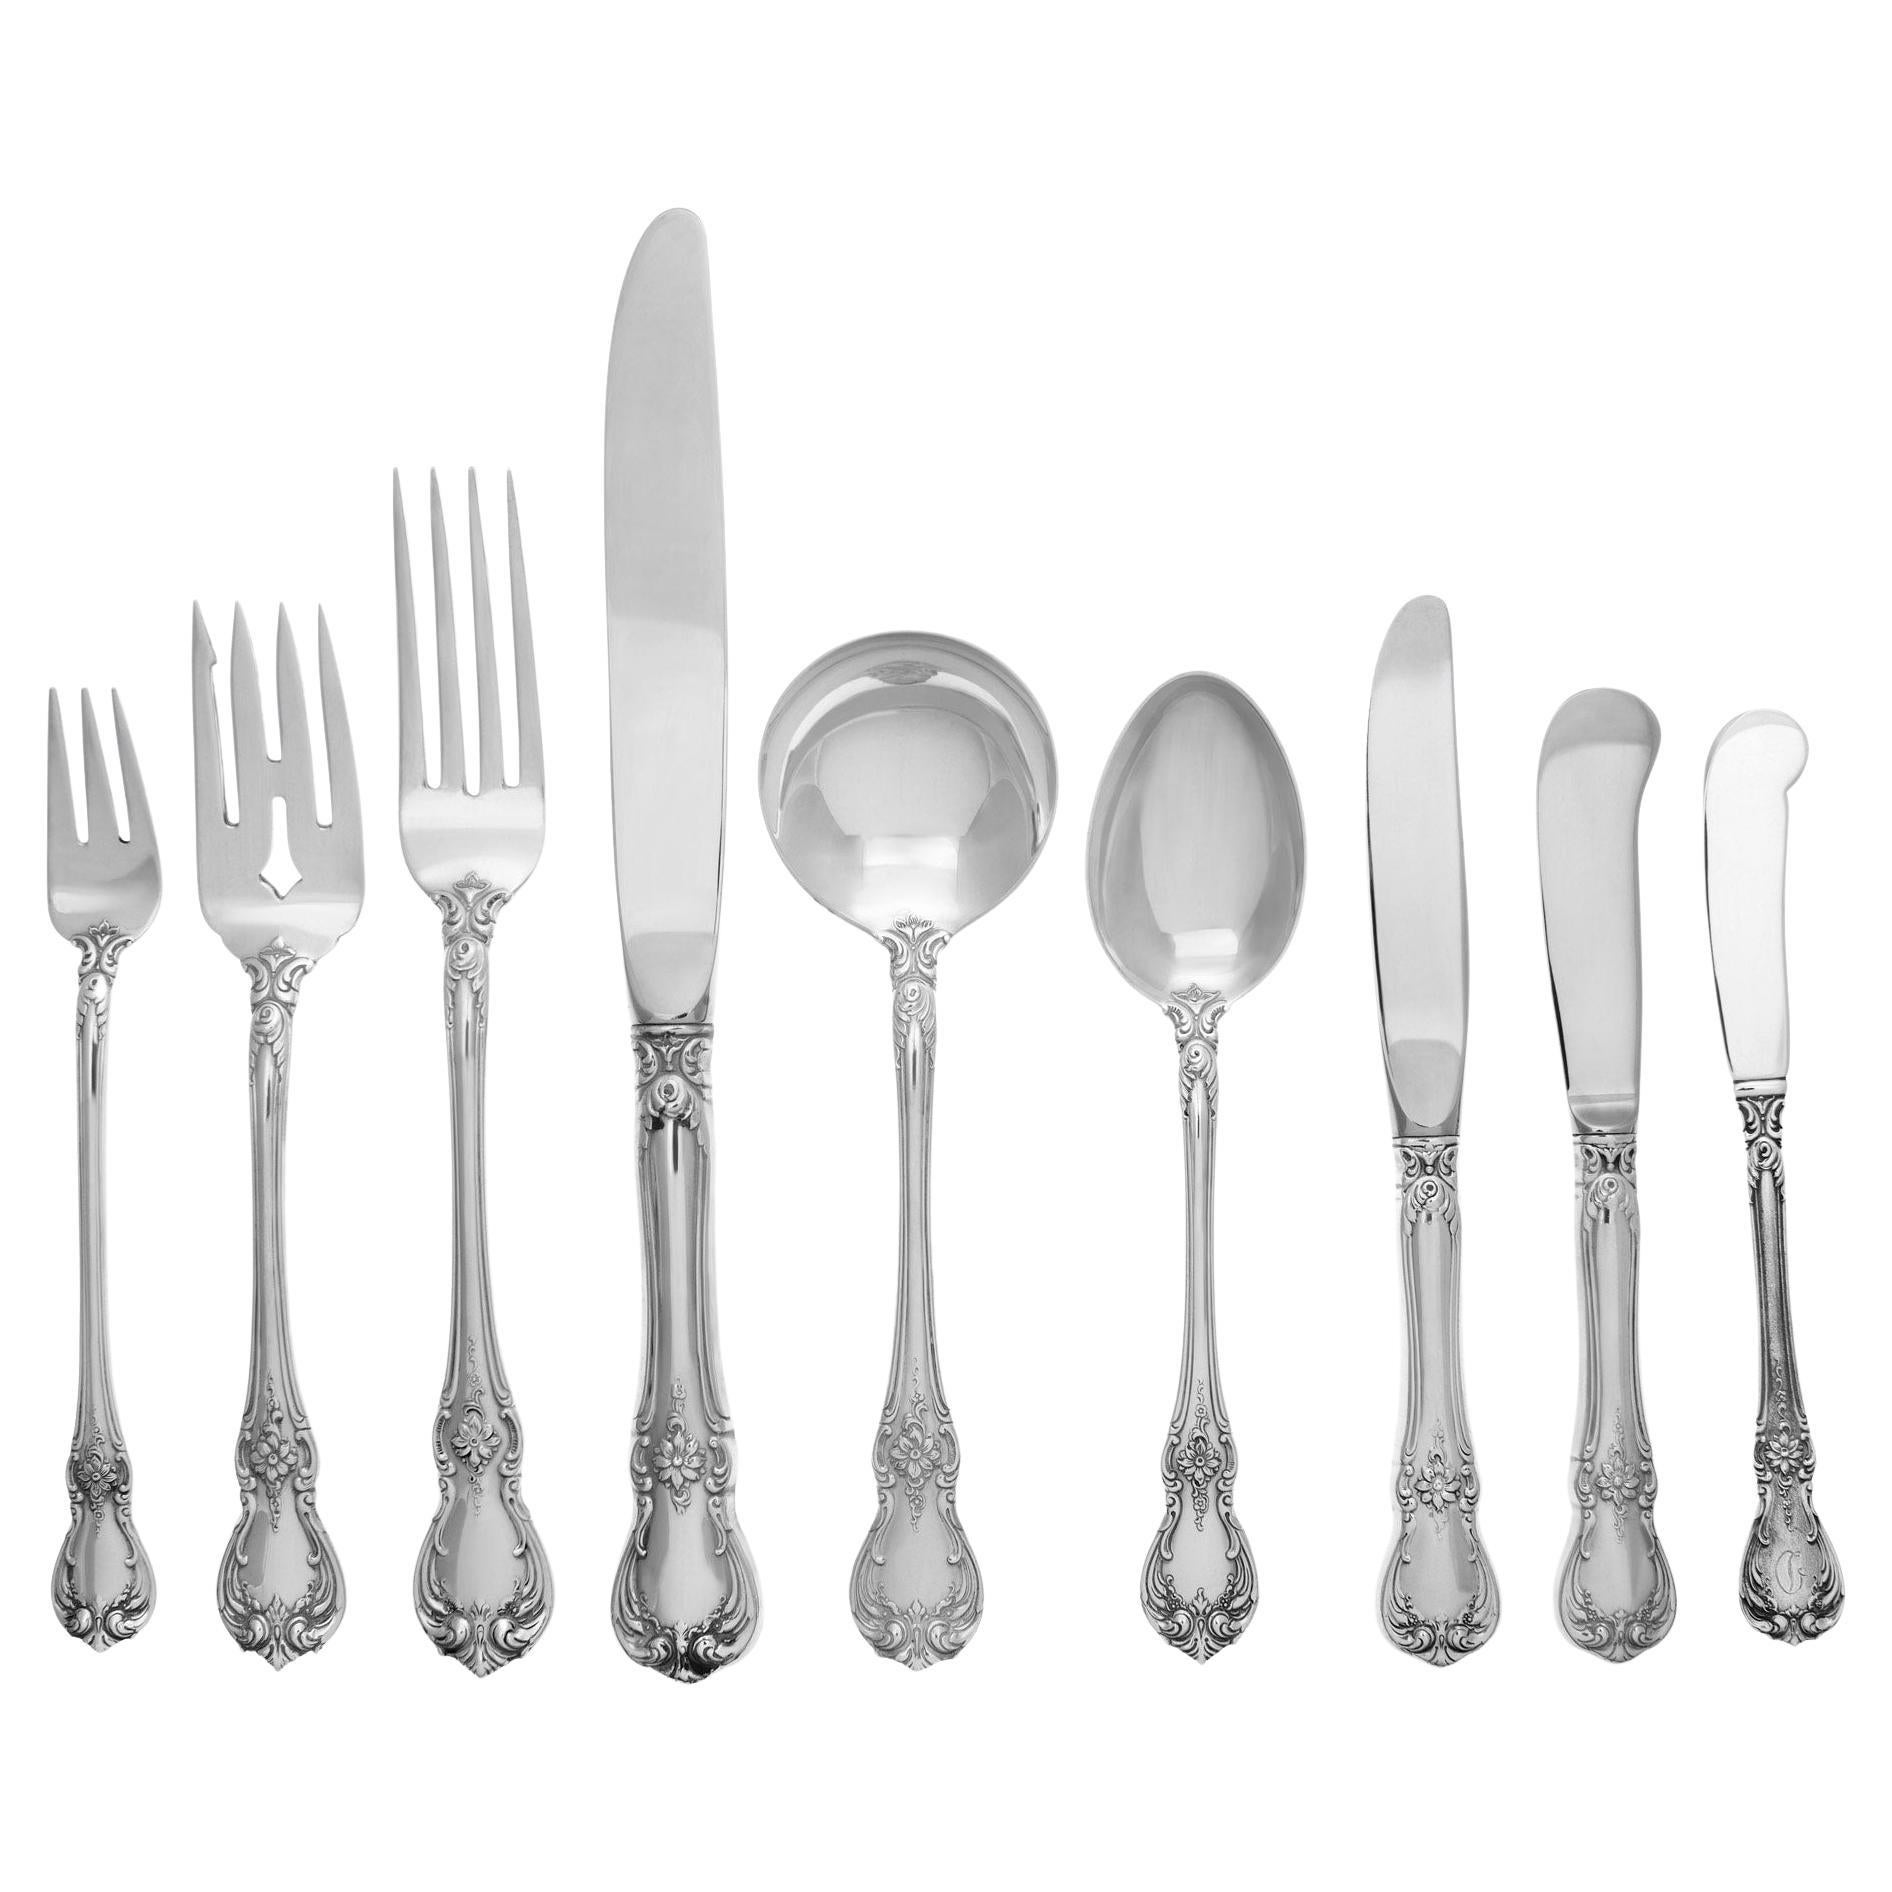 Sterling Silver Flatware Set Old Master Patented in 1942 by Towle Silversmiths For Sale